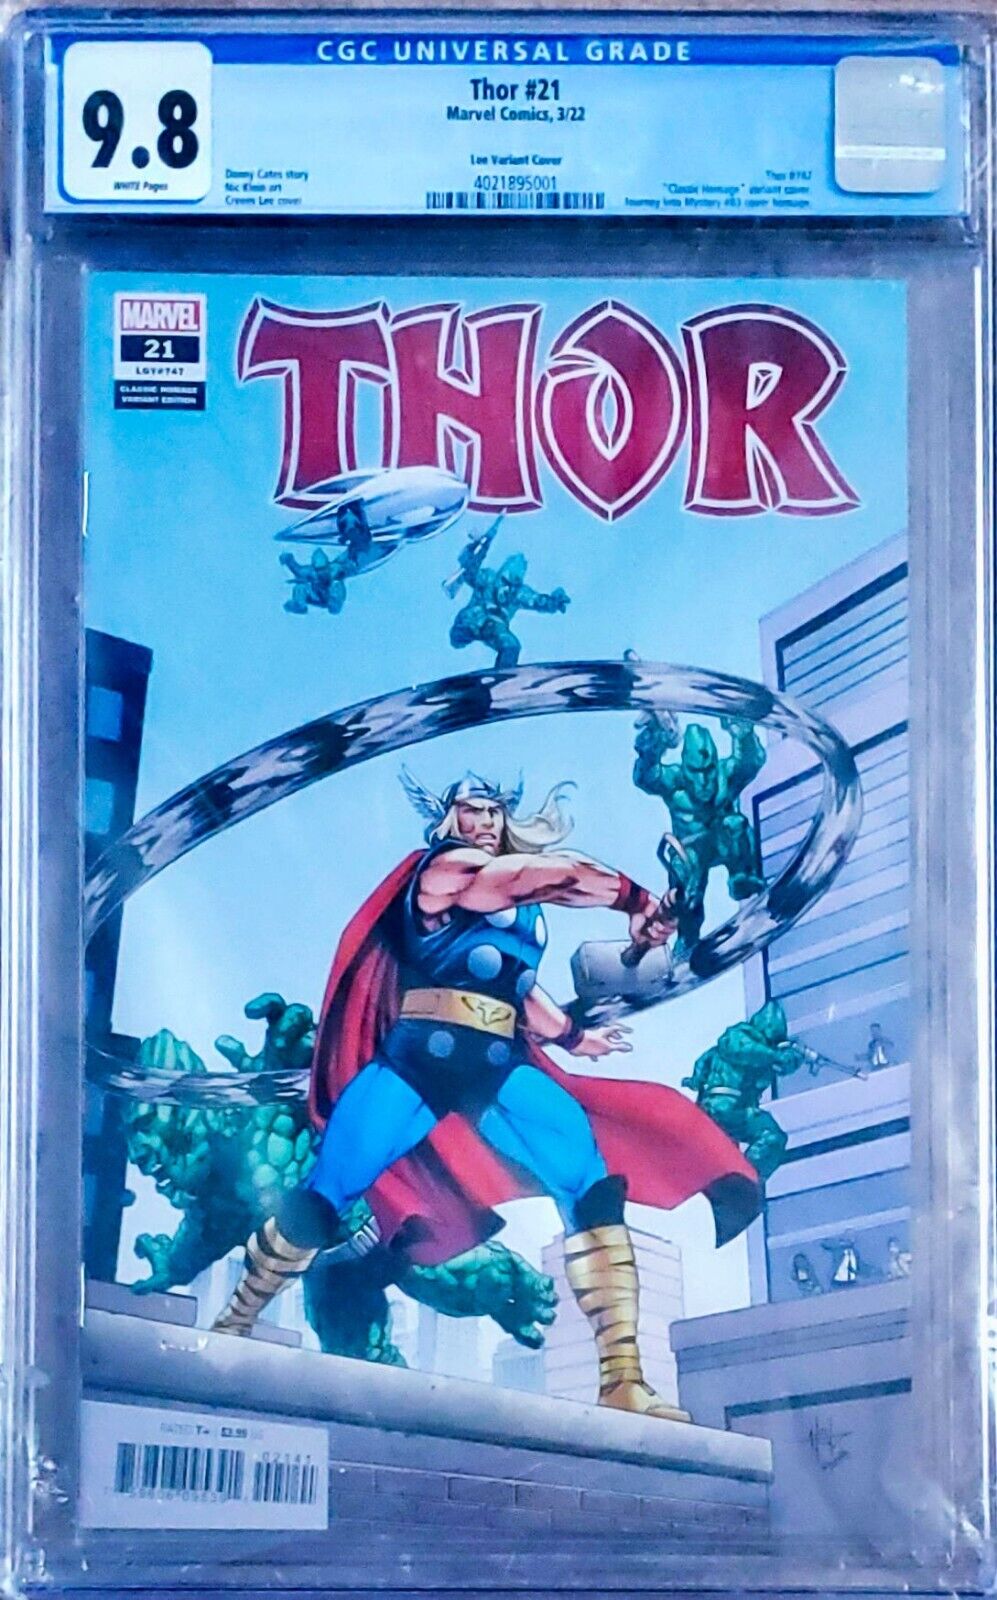 Thor #21 (747) CGC 9.8 Crees Lee Homage To Journey Into Mystery 83 